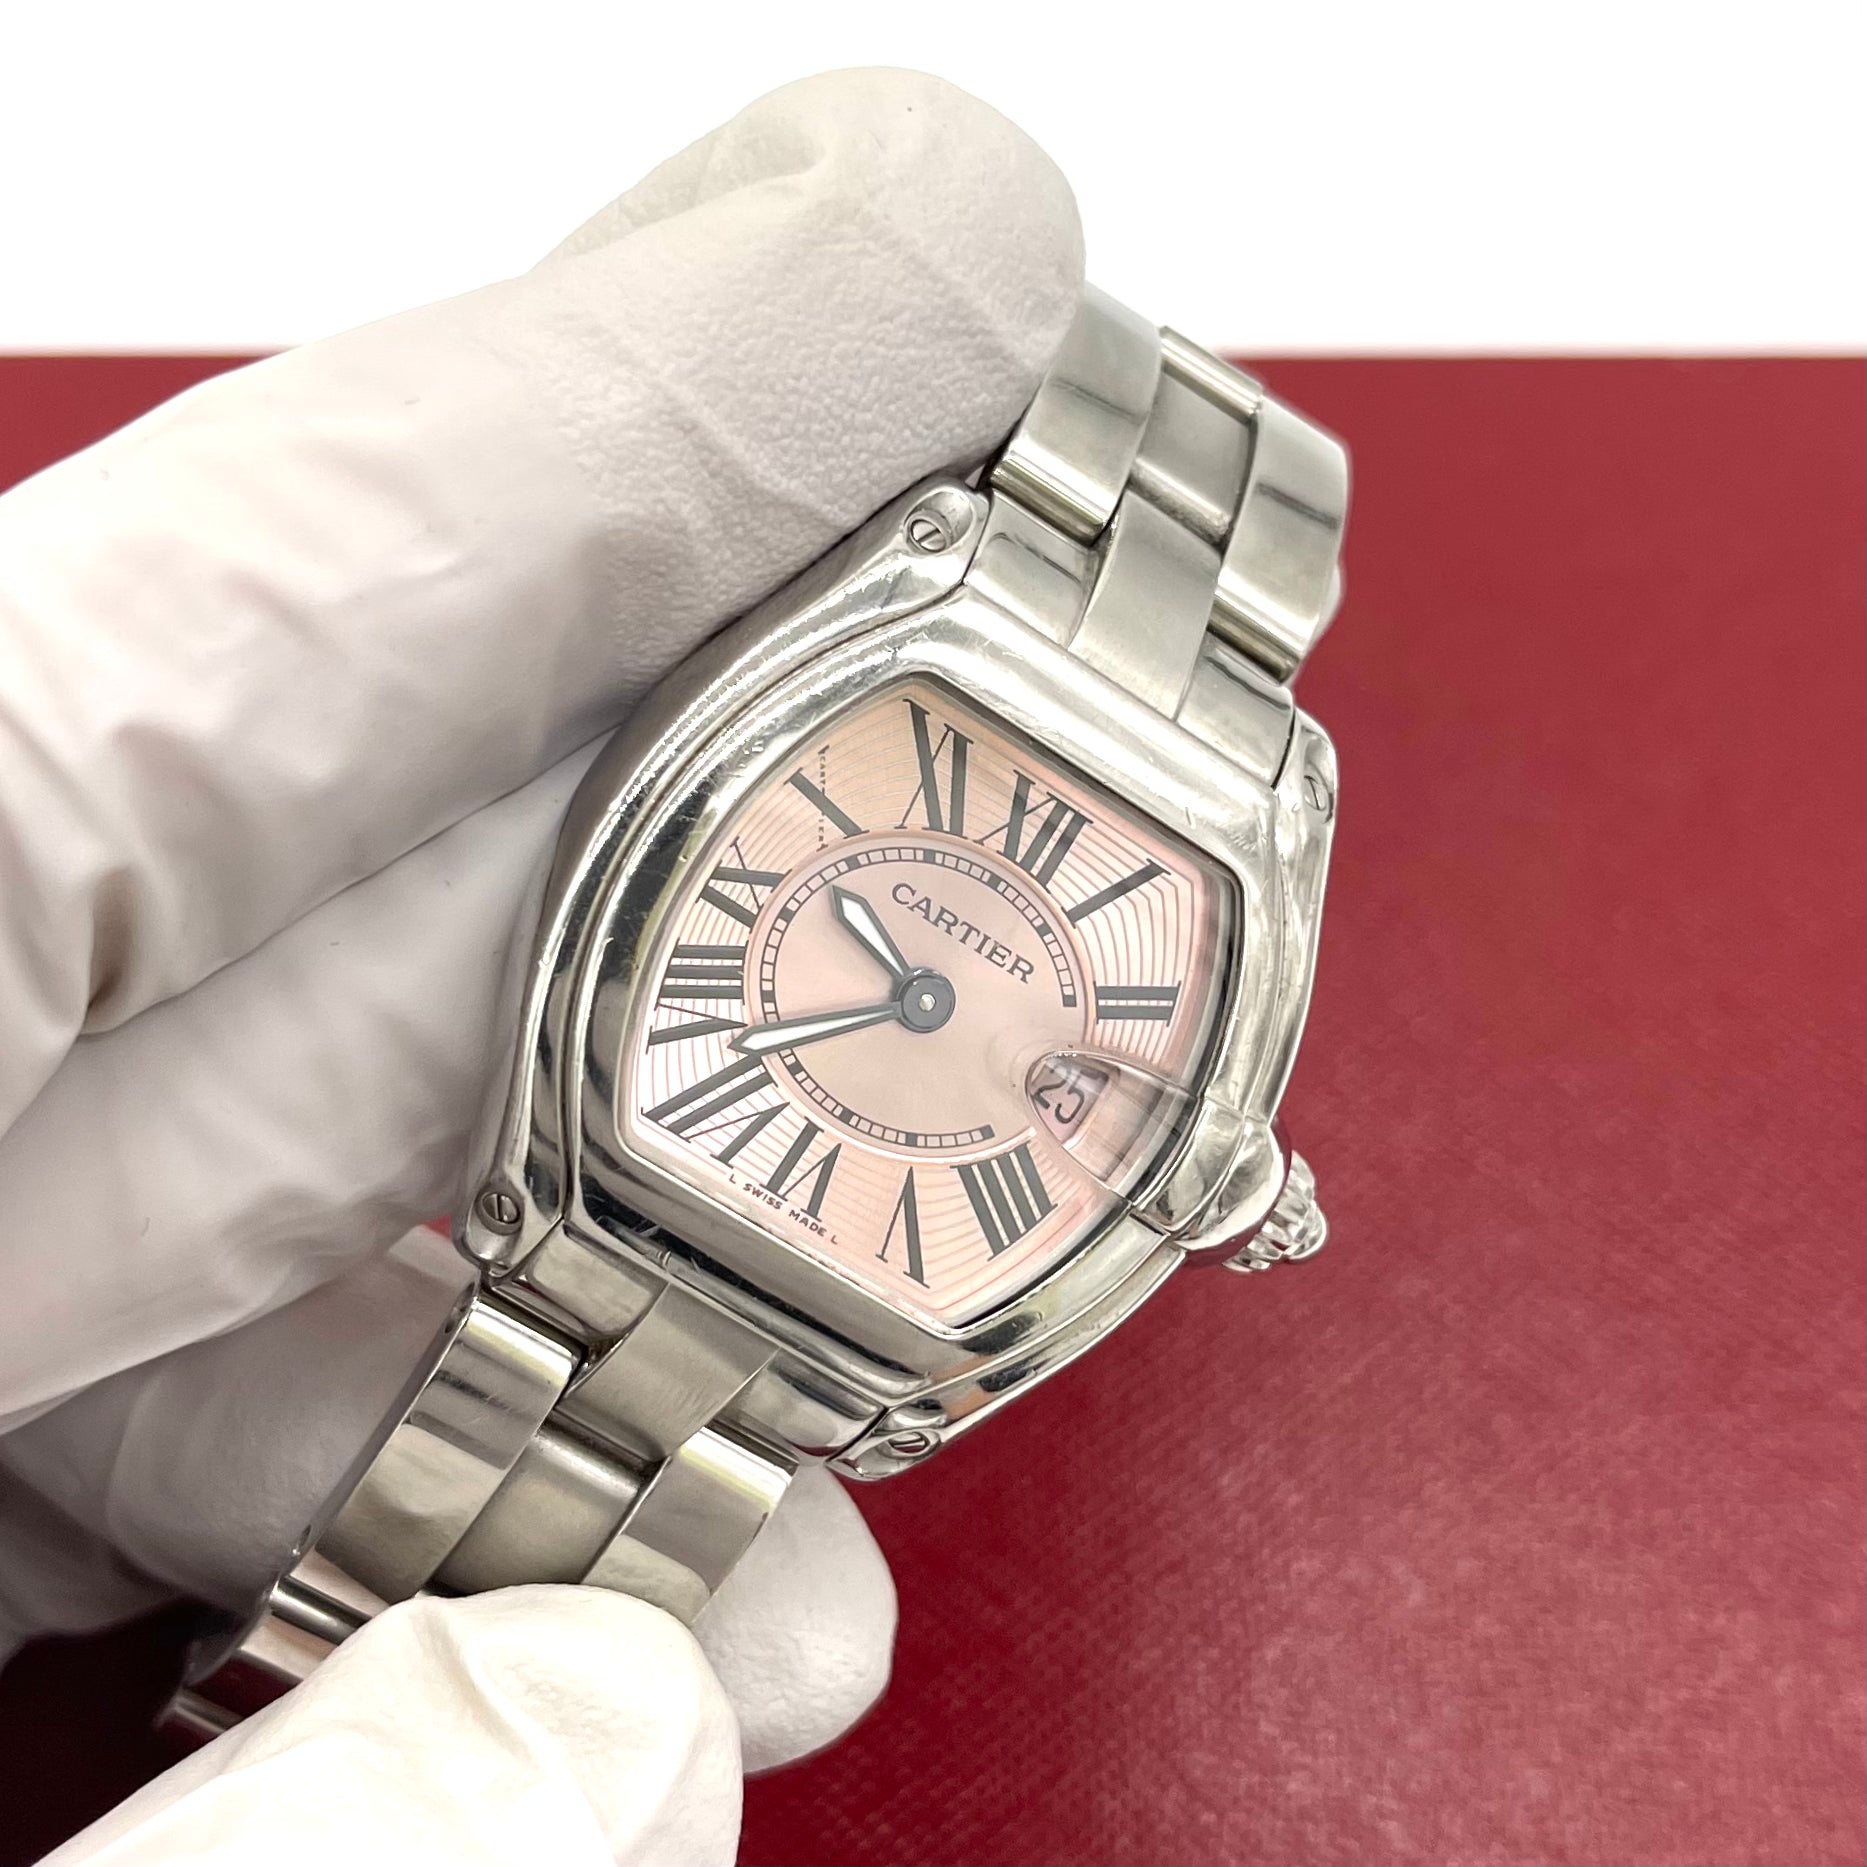 CARTIER Lady Roadster ref 2675 Pink Dial circa 2000